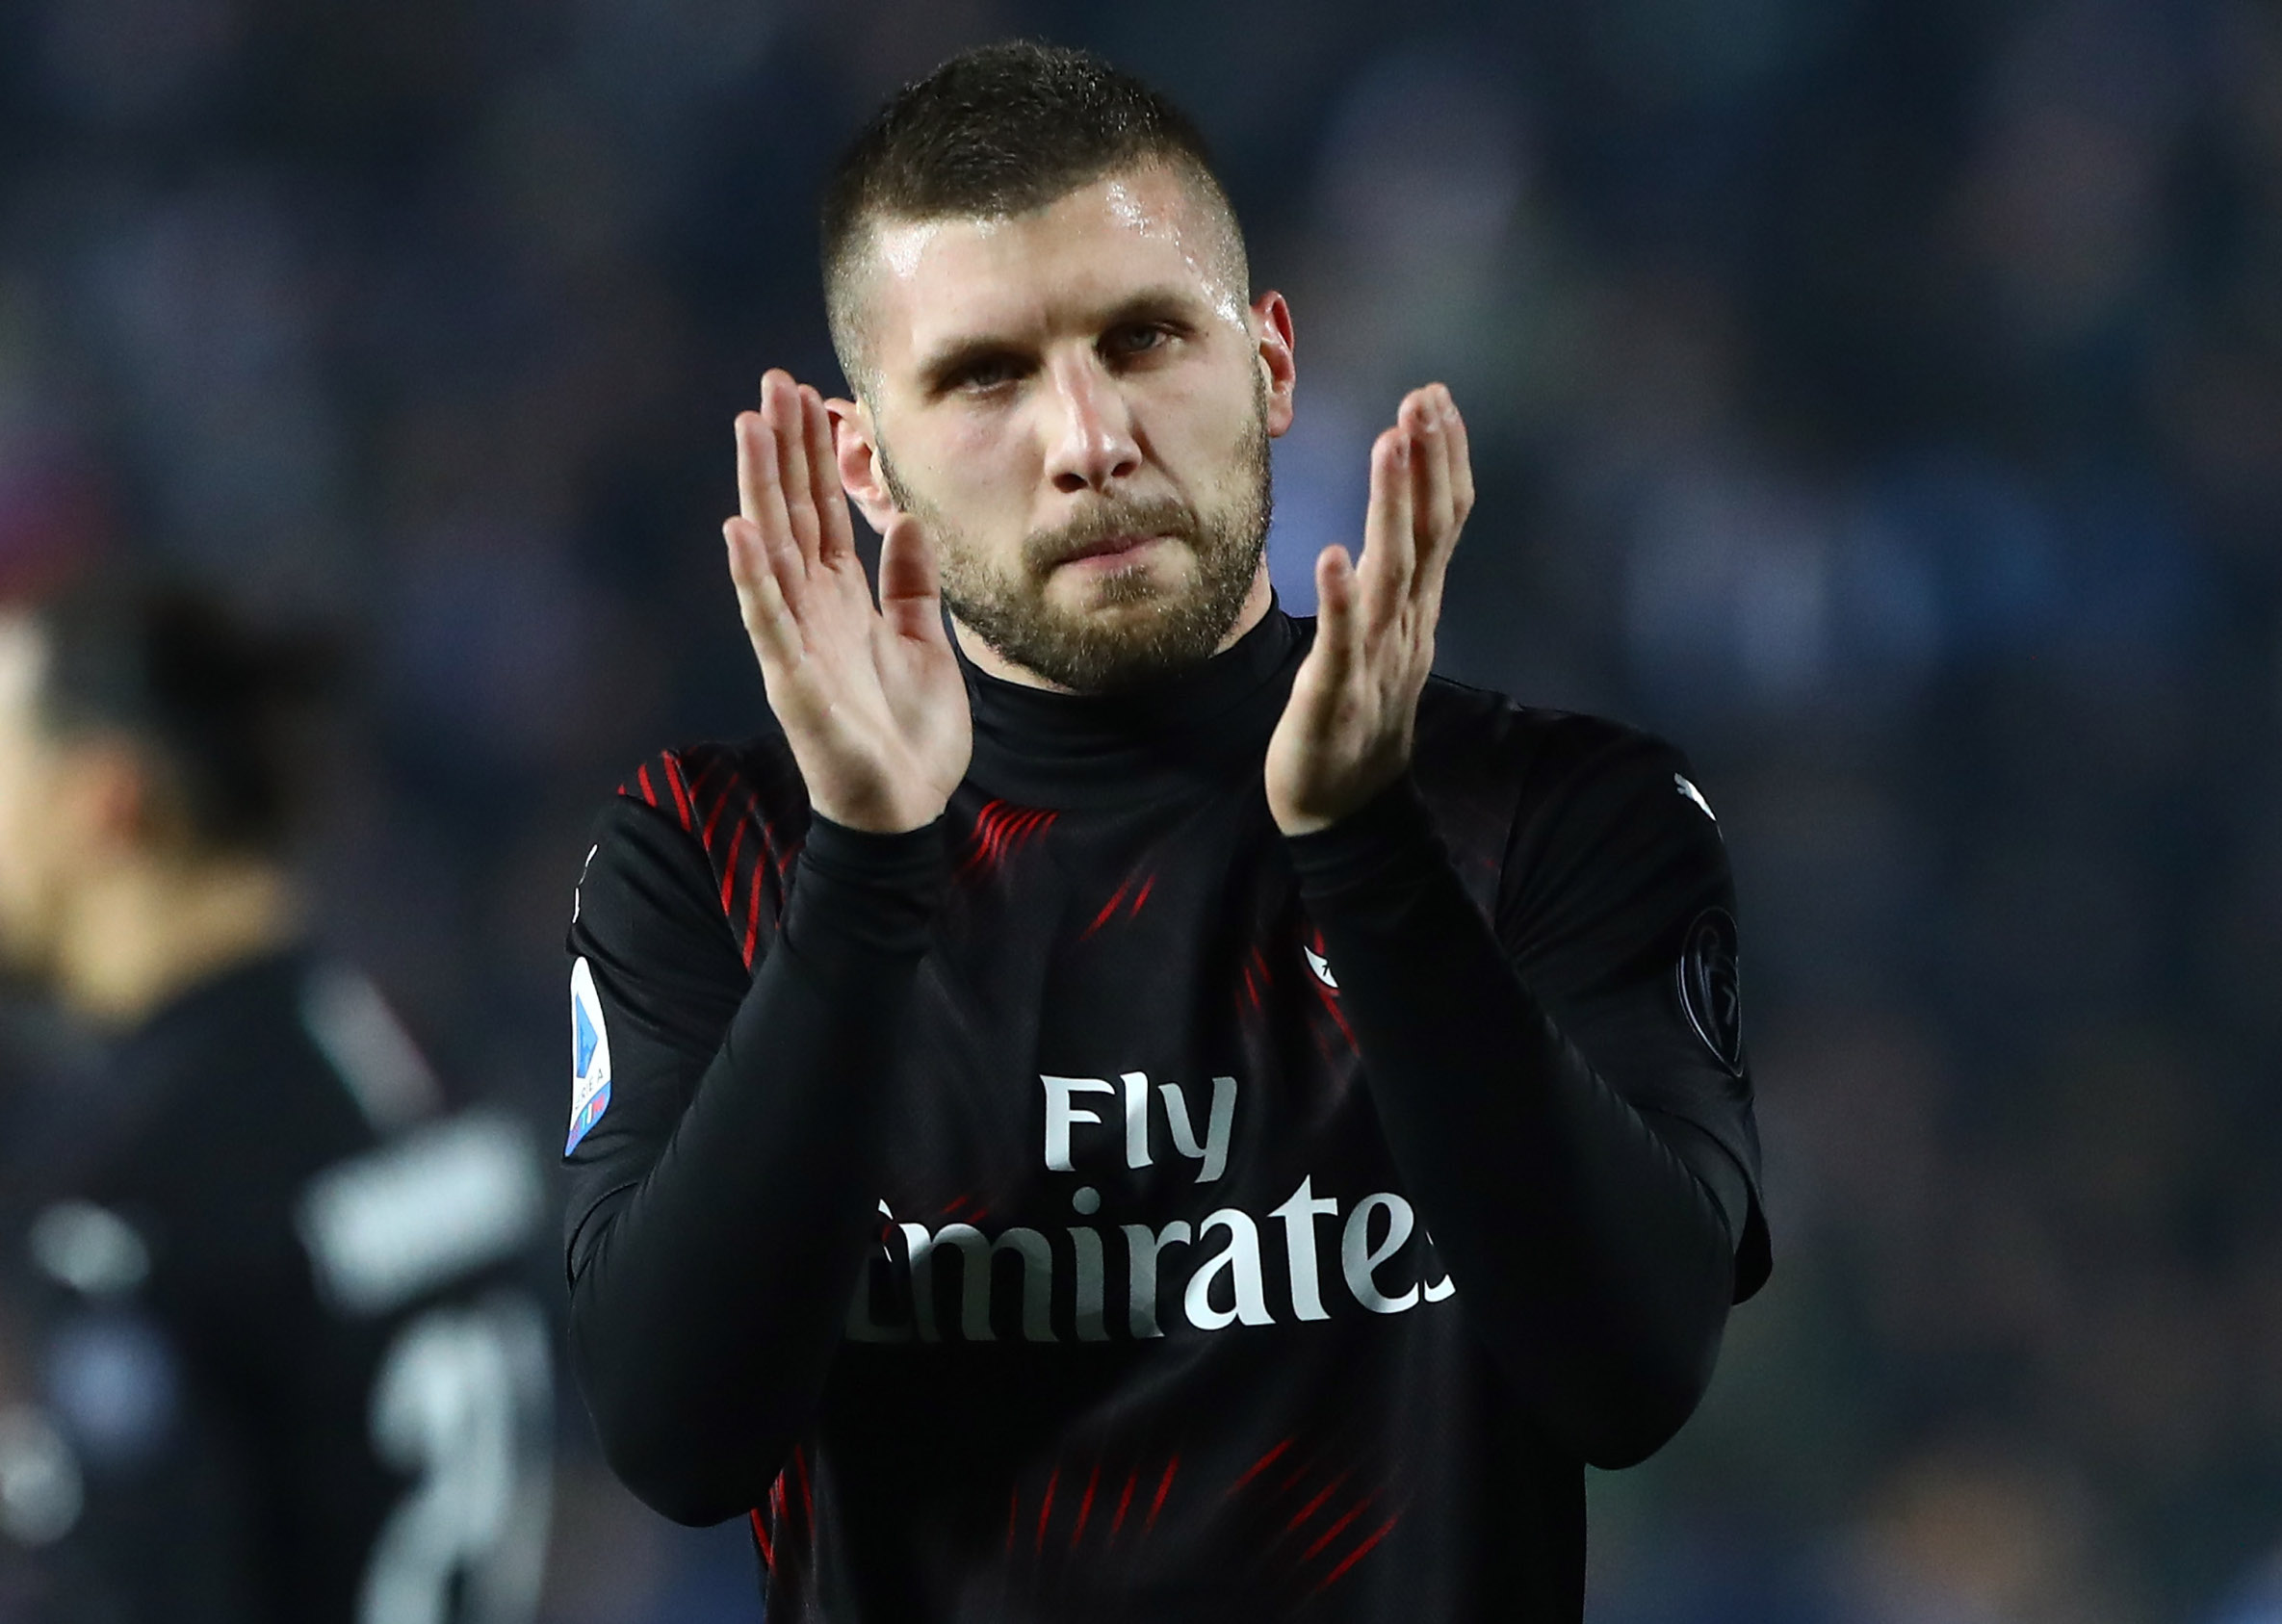 BRESCIA, ITALY - JANUARY 24:  Ante Rebic of AC Milan celebrates a victory at the end of the Serie A match between Brescia Calcio and AC Milan at Stadio Mario Rigamonti on January 24, 2020 in Brescia, Italy.  (Photo by Marco Luzzani/Getty Images)